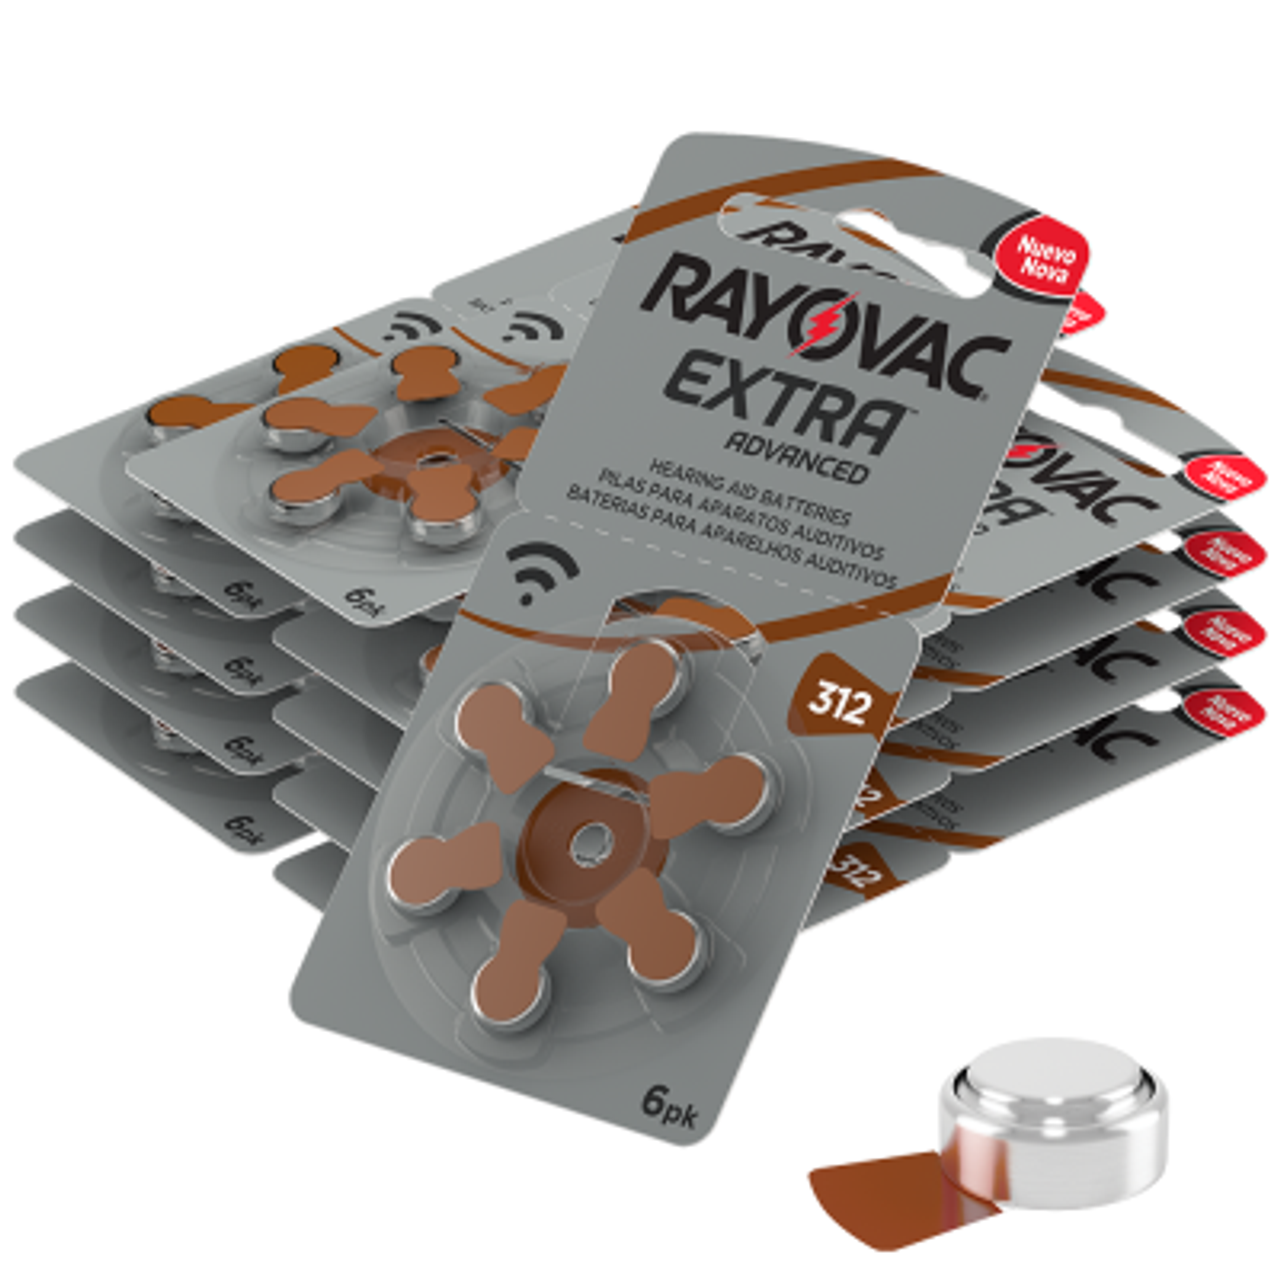 Rayovac Extra Size 312, Brown, Hearing Aid Batteries